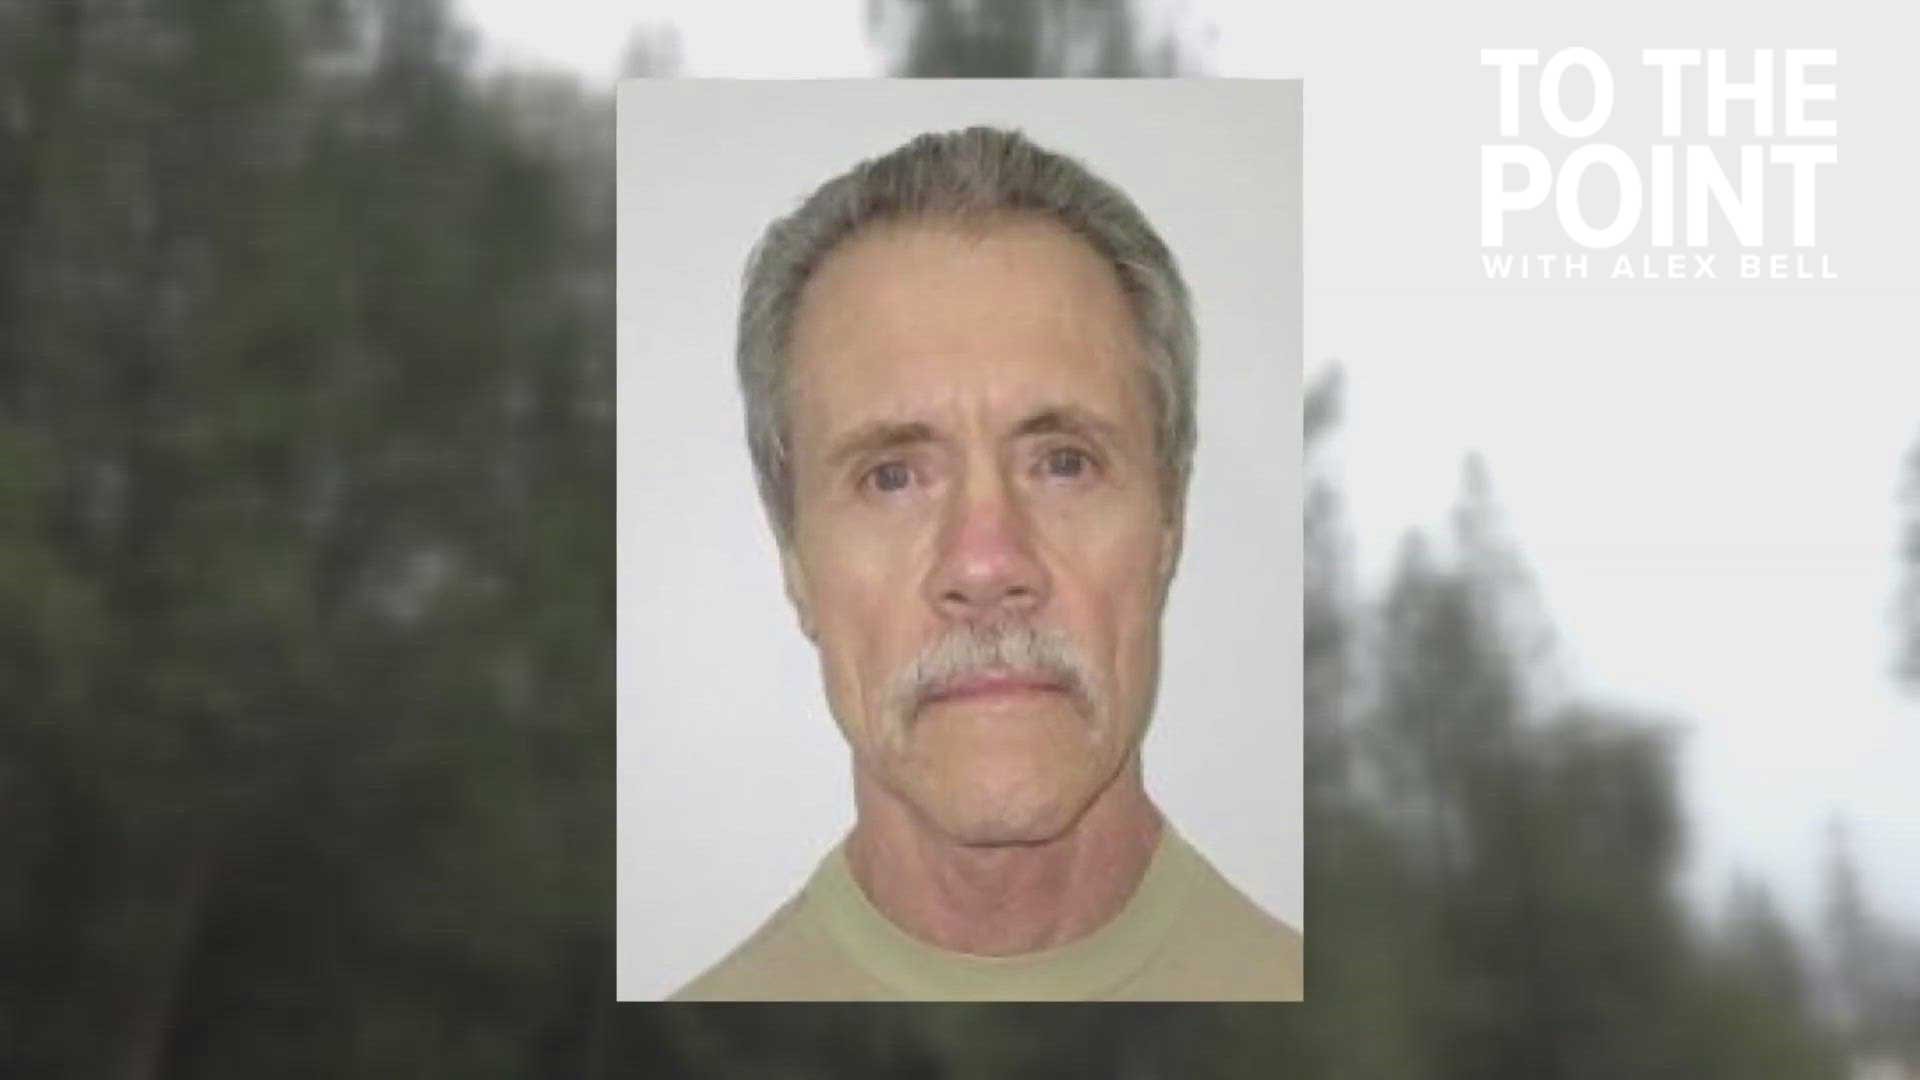 Property near tribal land 'no longer viable' for release of sexually violent predator in Placer County